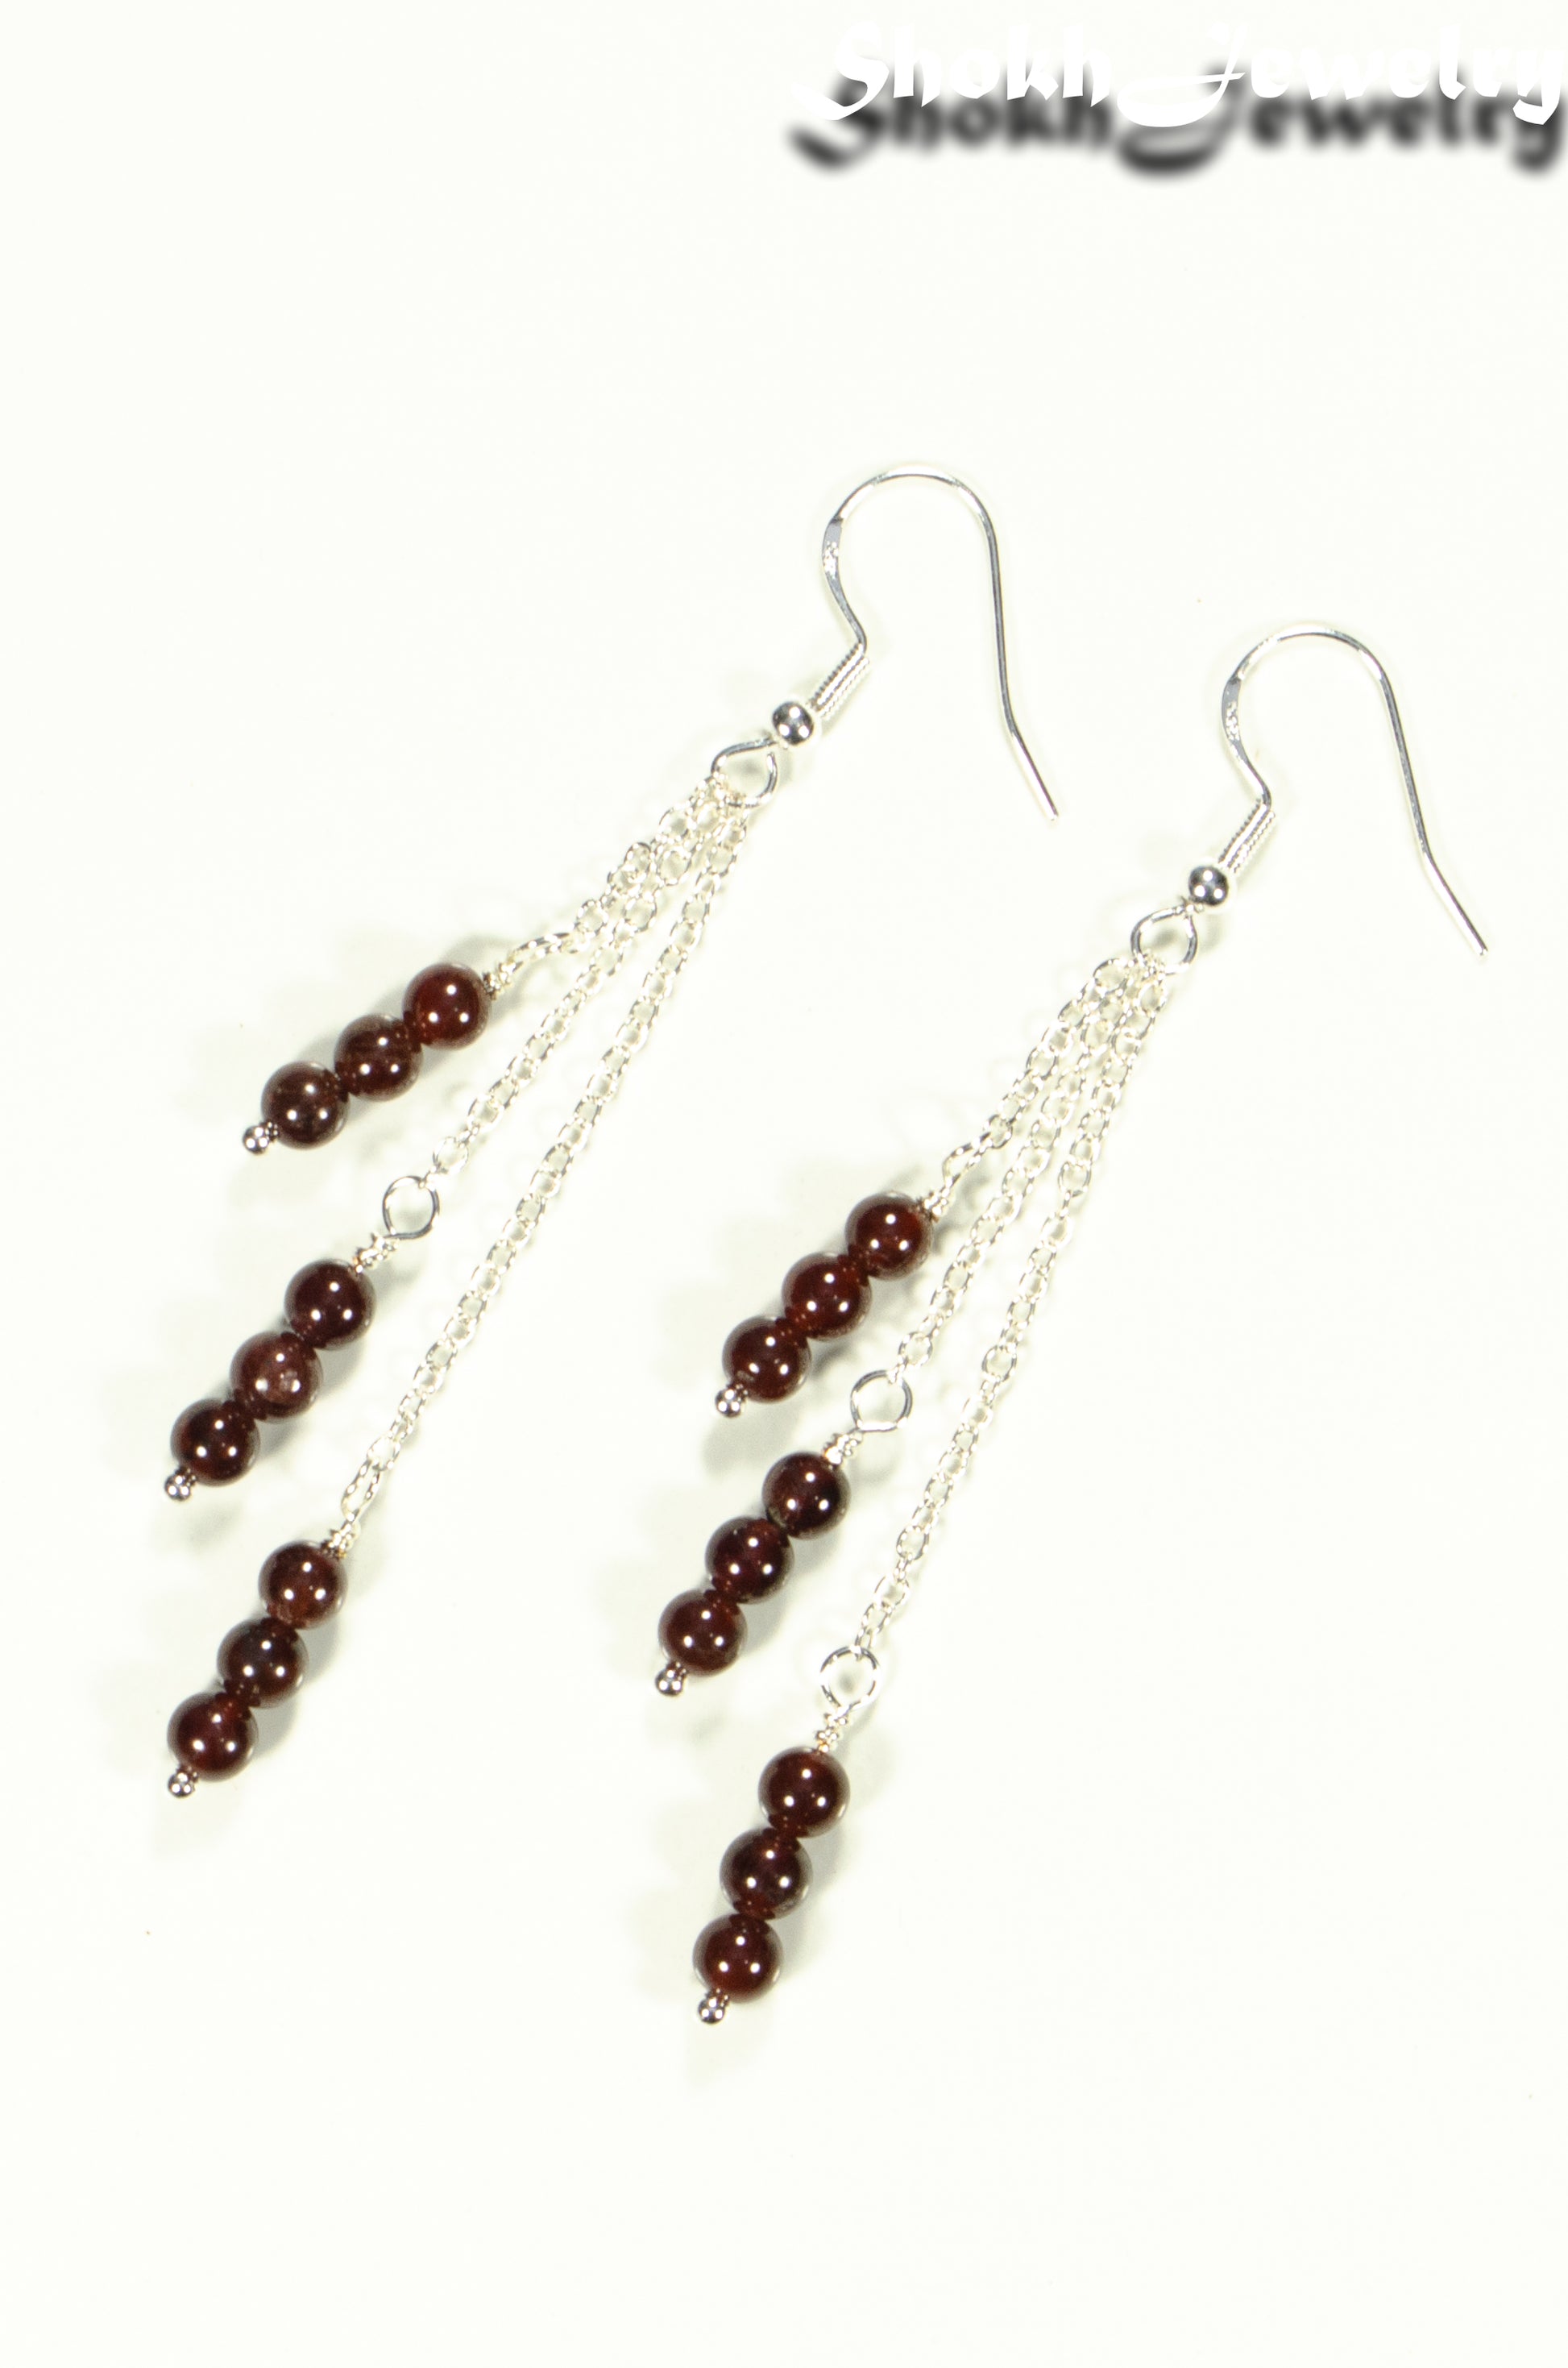 Top view of Silver Plated Chain and Garnet Crystal Earrings.